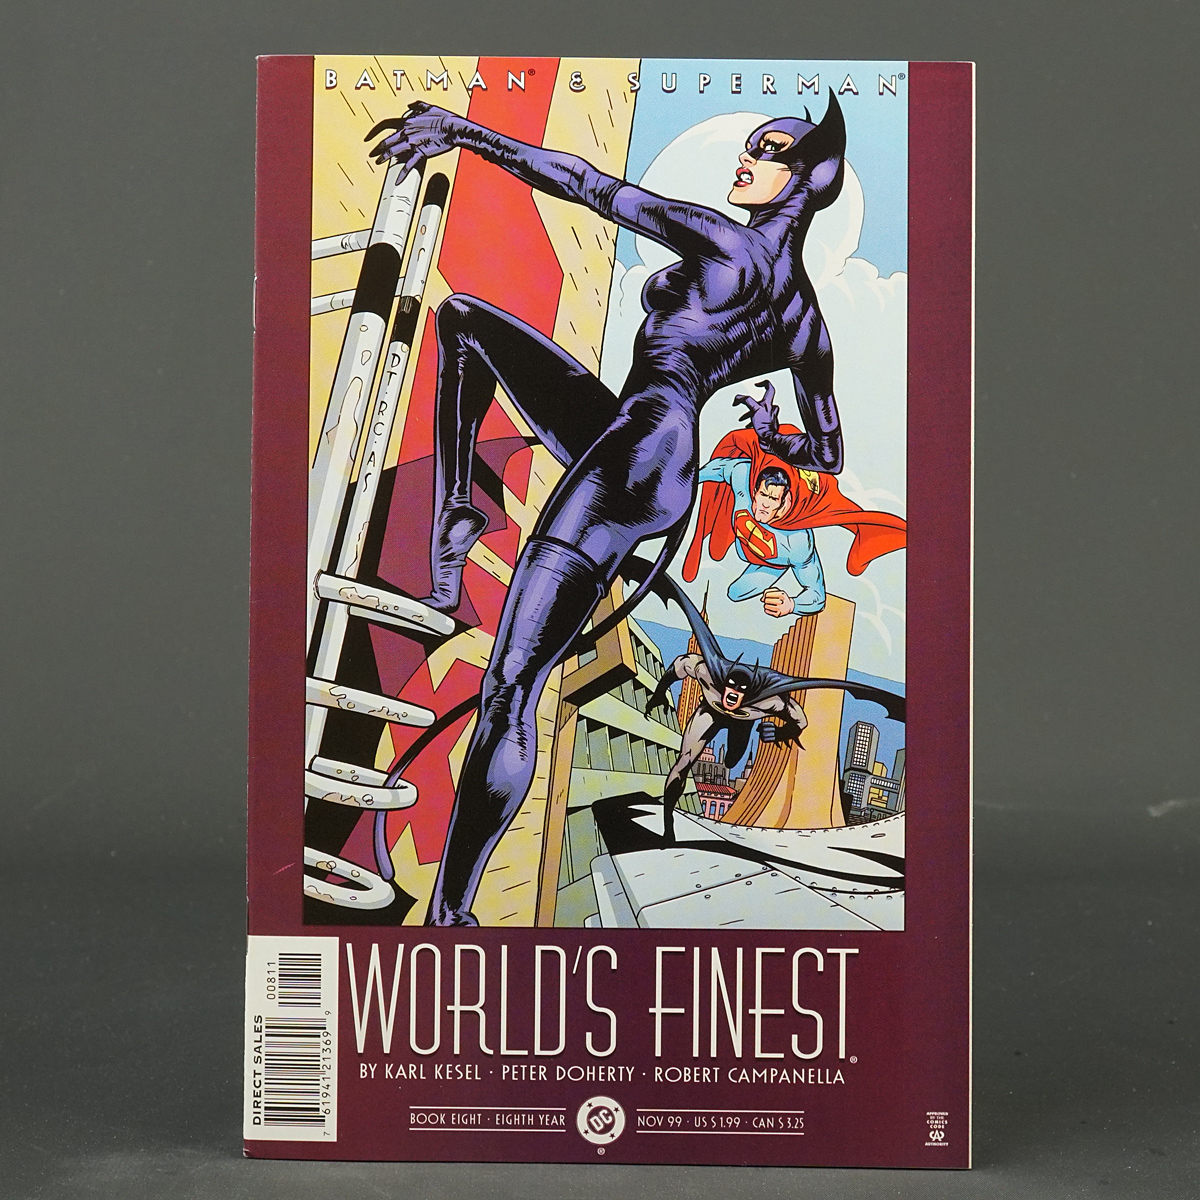 WORLDS FINEST #8 DC Comics 1999 (CA) Taylor (W) Kesel (A) Doherty 230915A